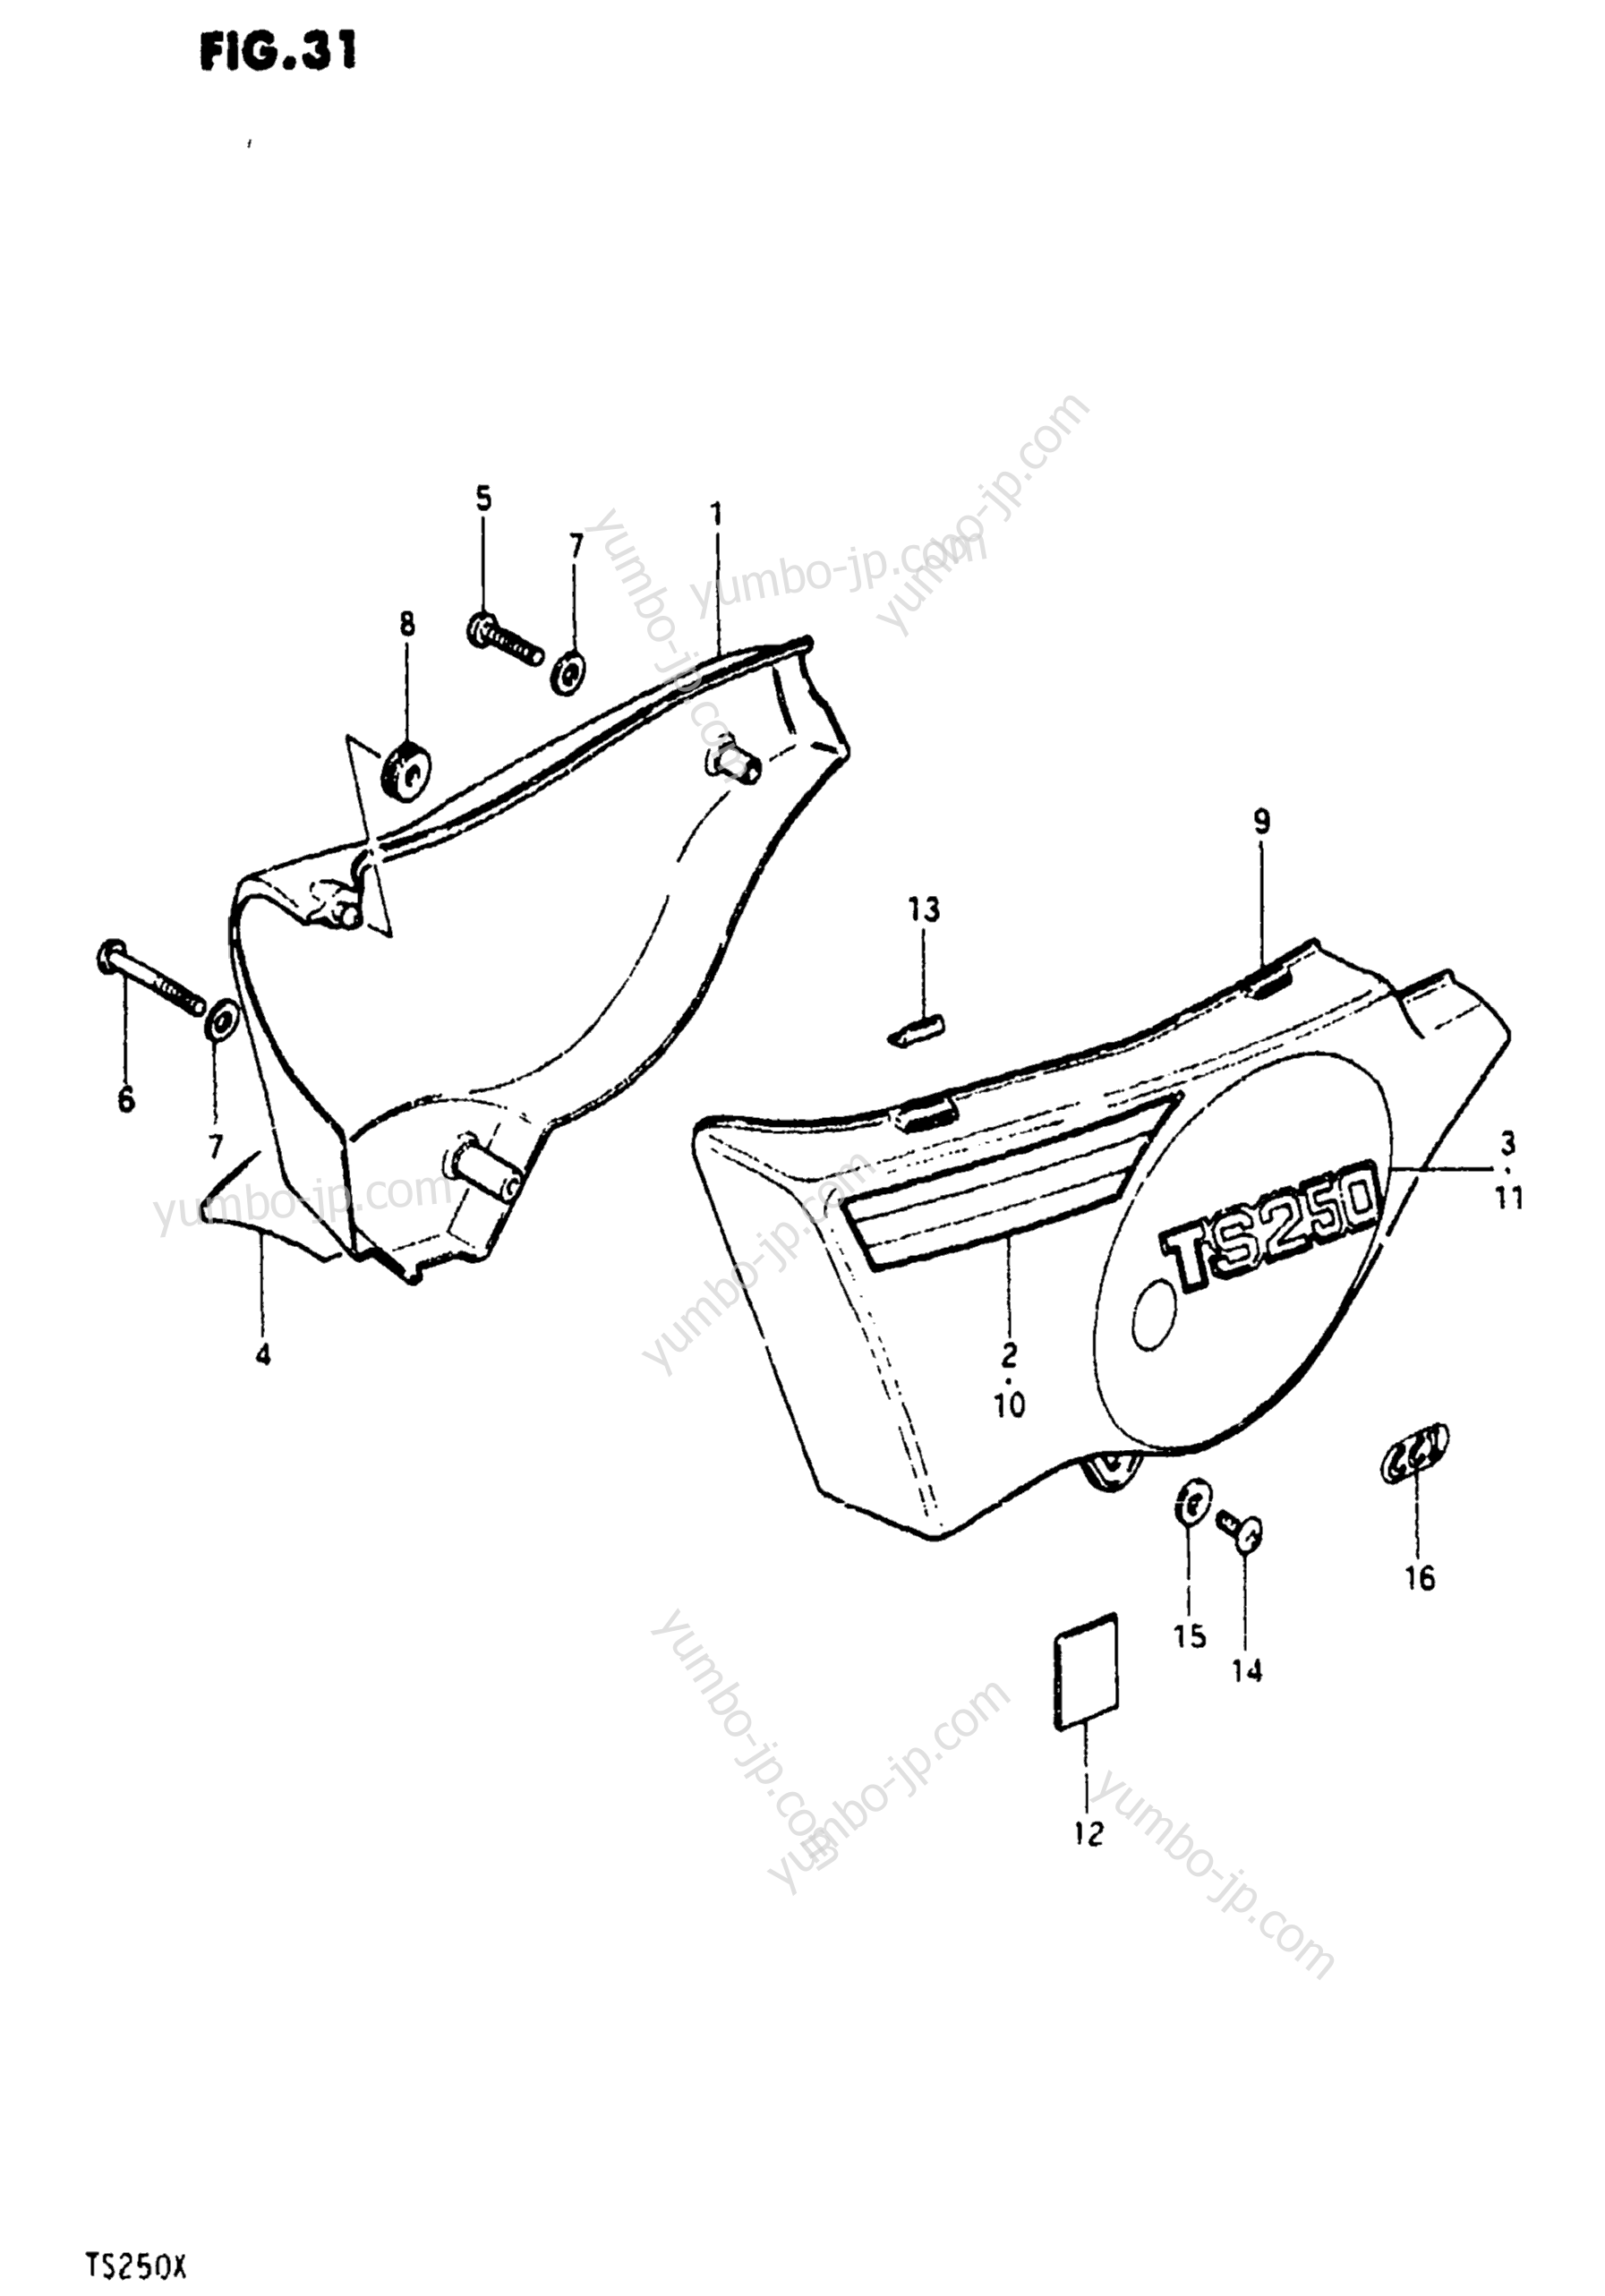 FRAME COVER (TS250X) for motorcycles SUZUKI TS250 1981 year